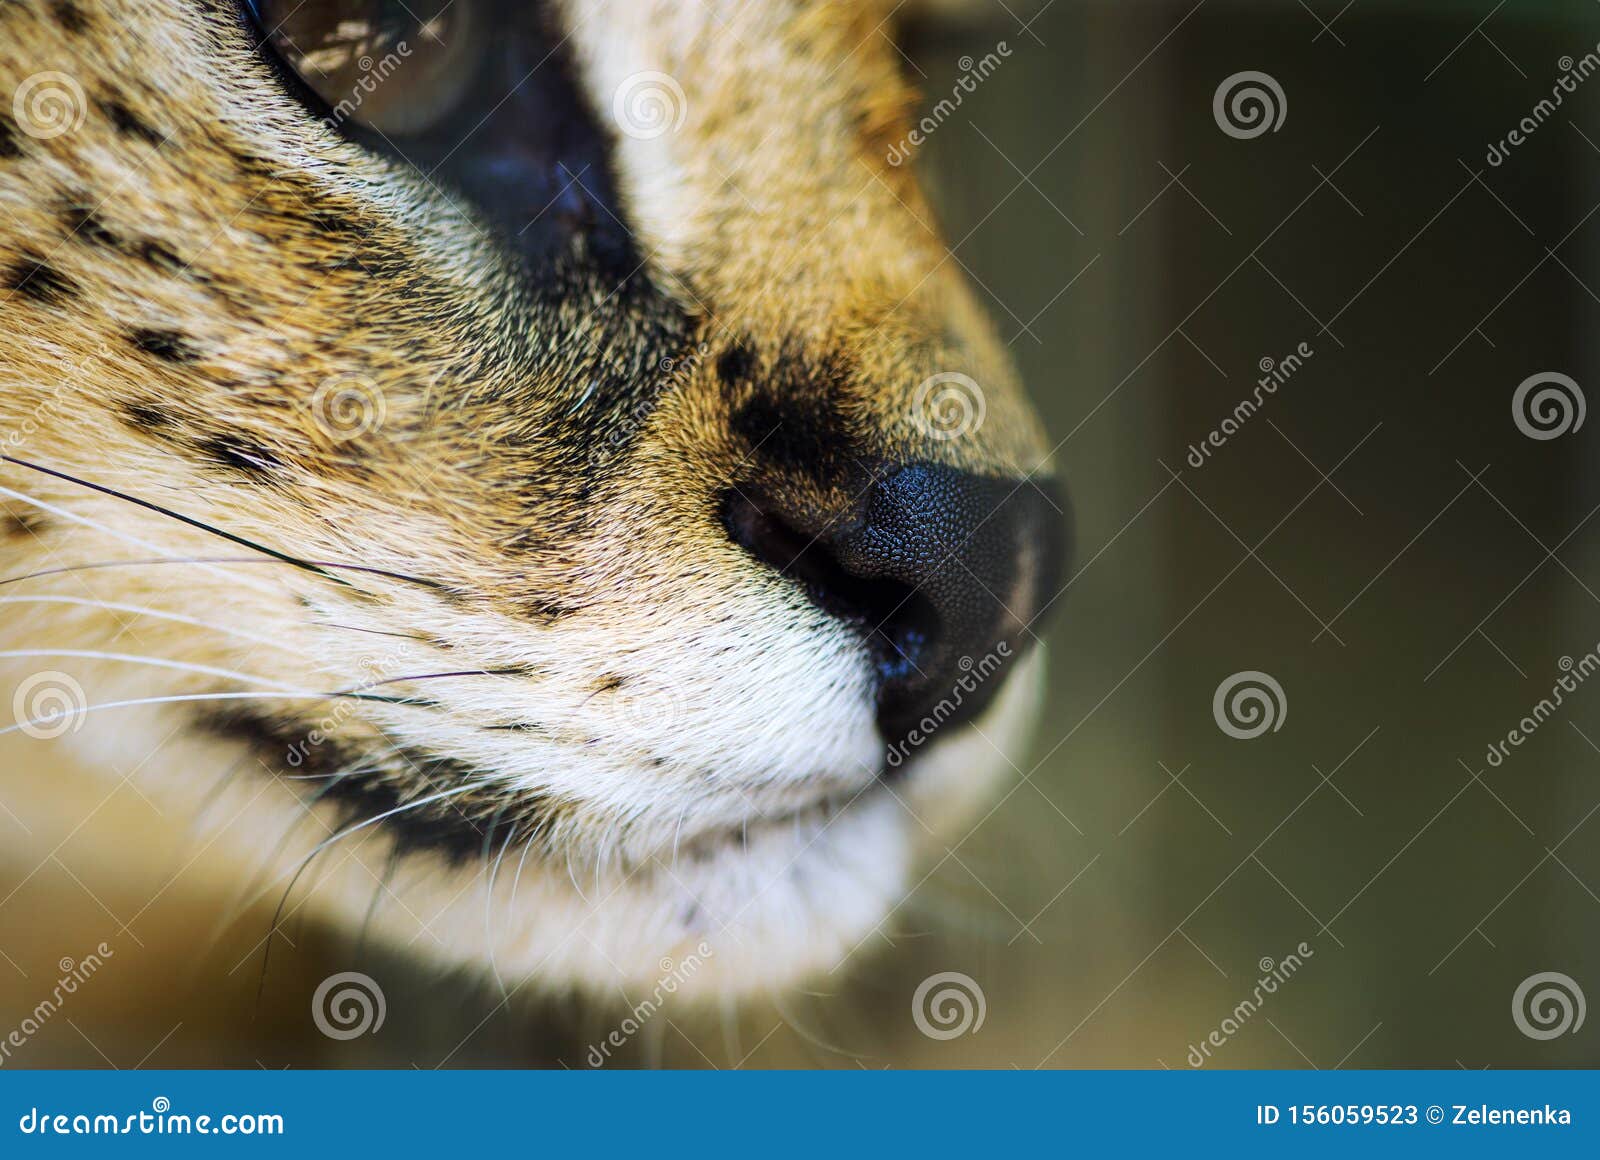 serval ca, focus on the nose